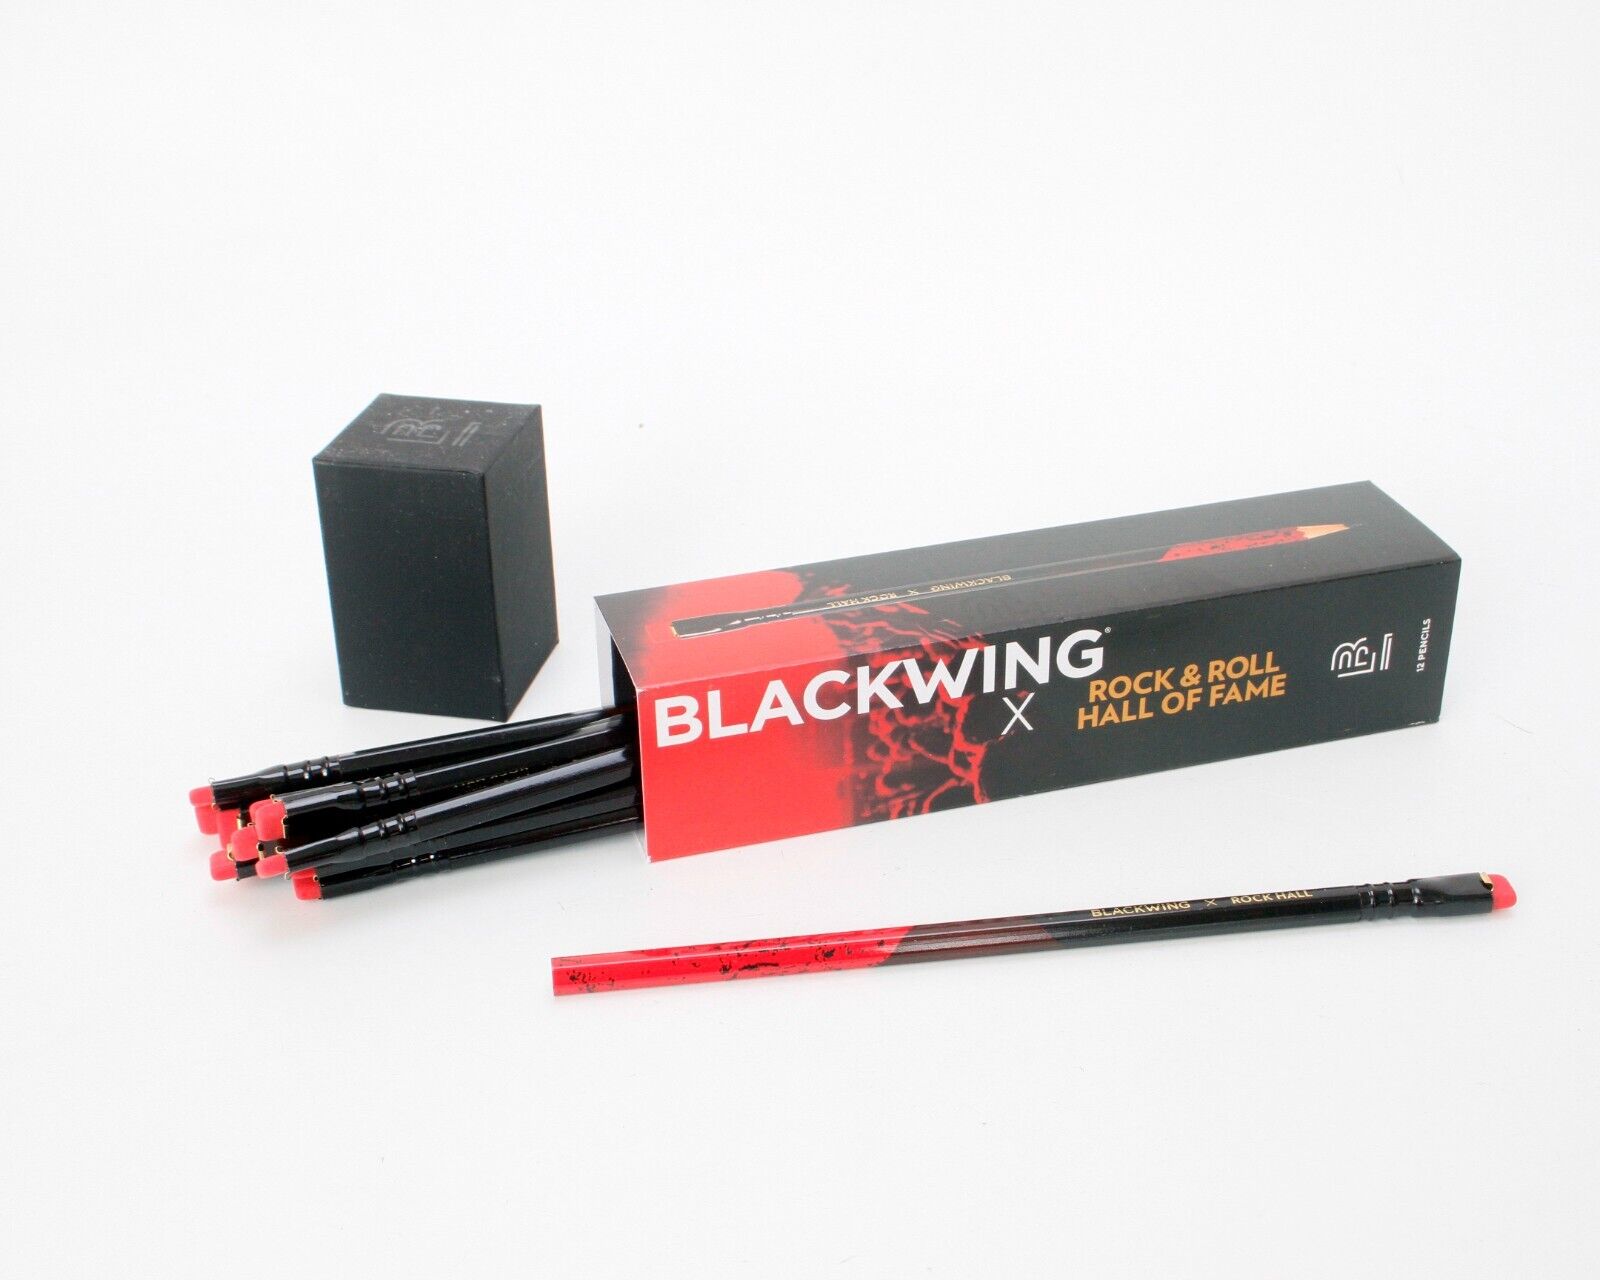 Blackwing X Rock & Roll Hall of Fame Wood Pencil